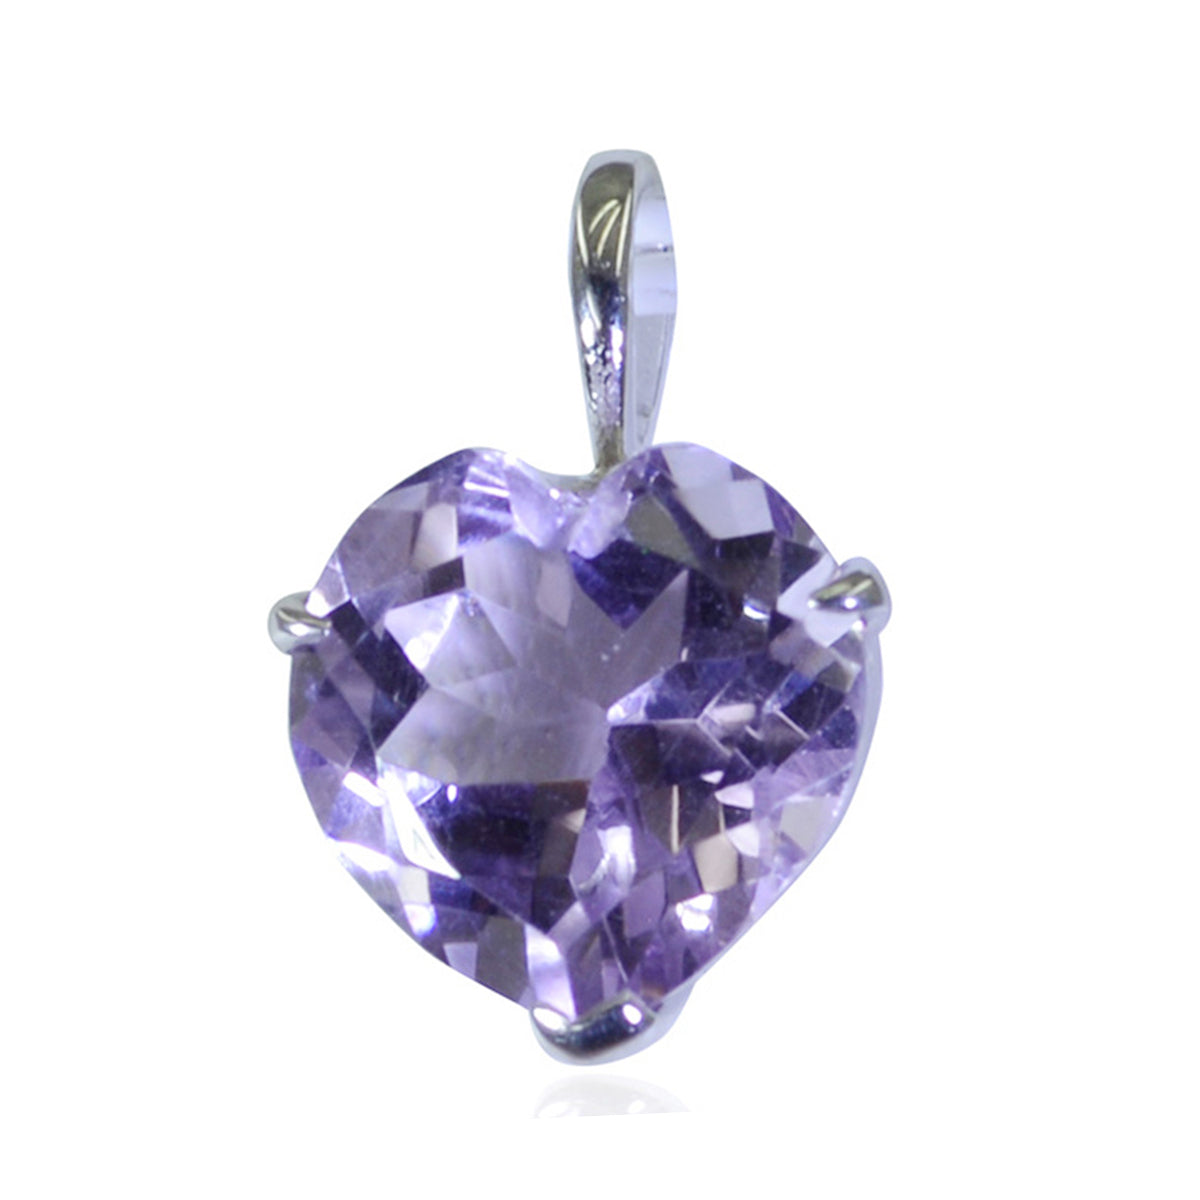 Riyo Stunning Gems Heart Faceted Purple Amethyst Solid Silver Pendant Gift For Easter Sunday